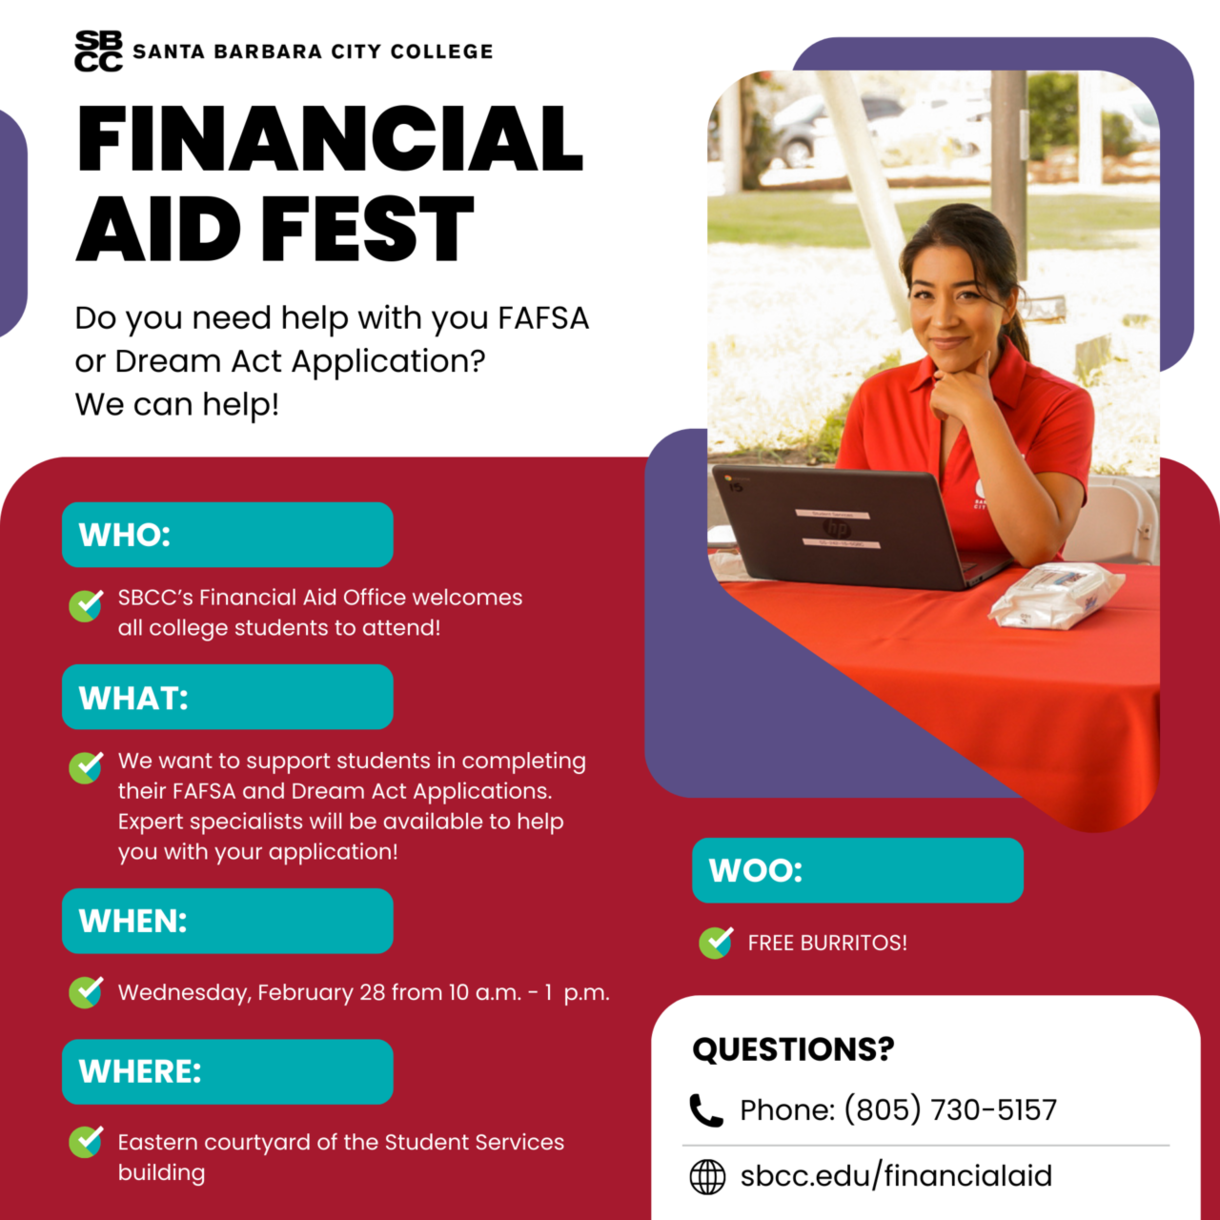 Financial Aid Fest flyer - February 28 from 10 a.m. - 1 p.m.  Open to ALL college students in the area who need help filling out FAFSA or Dream Act applications